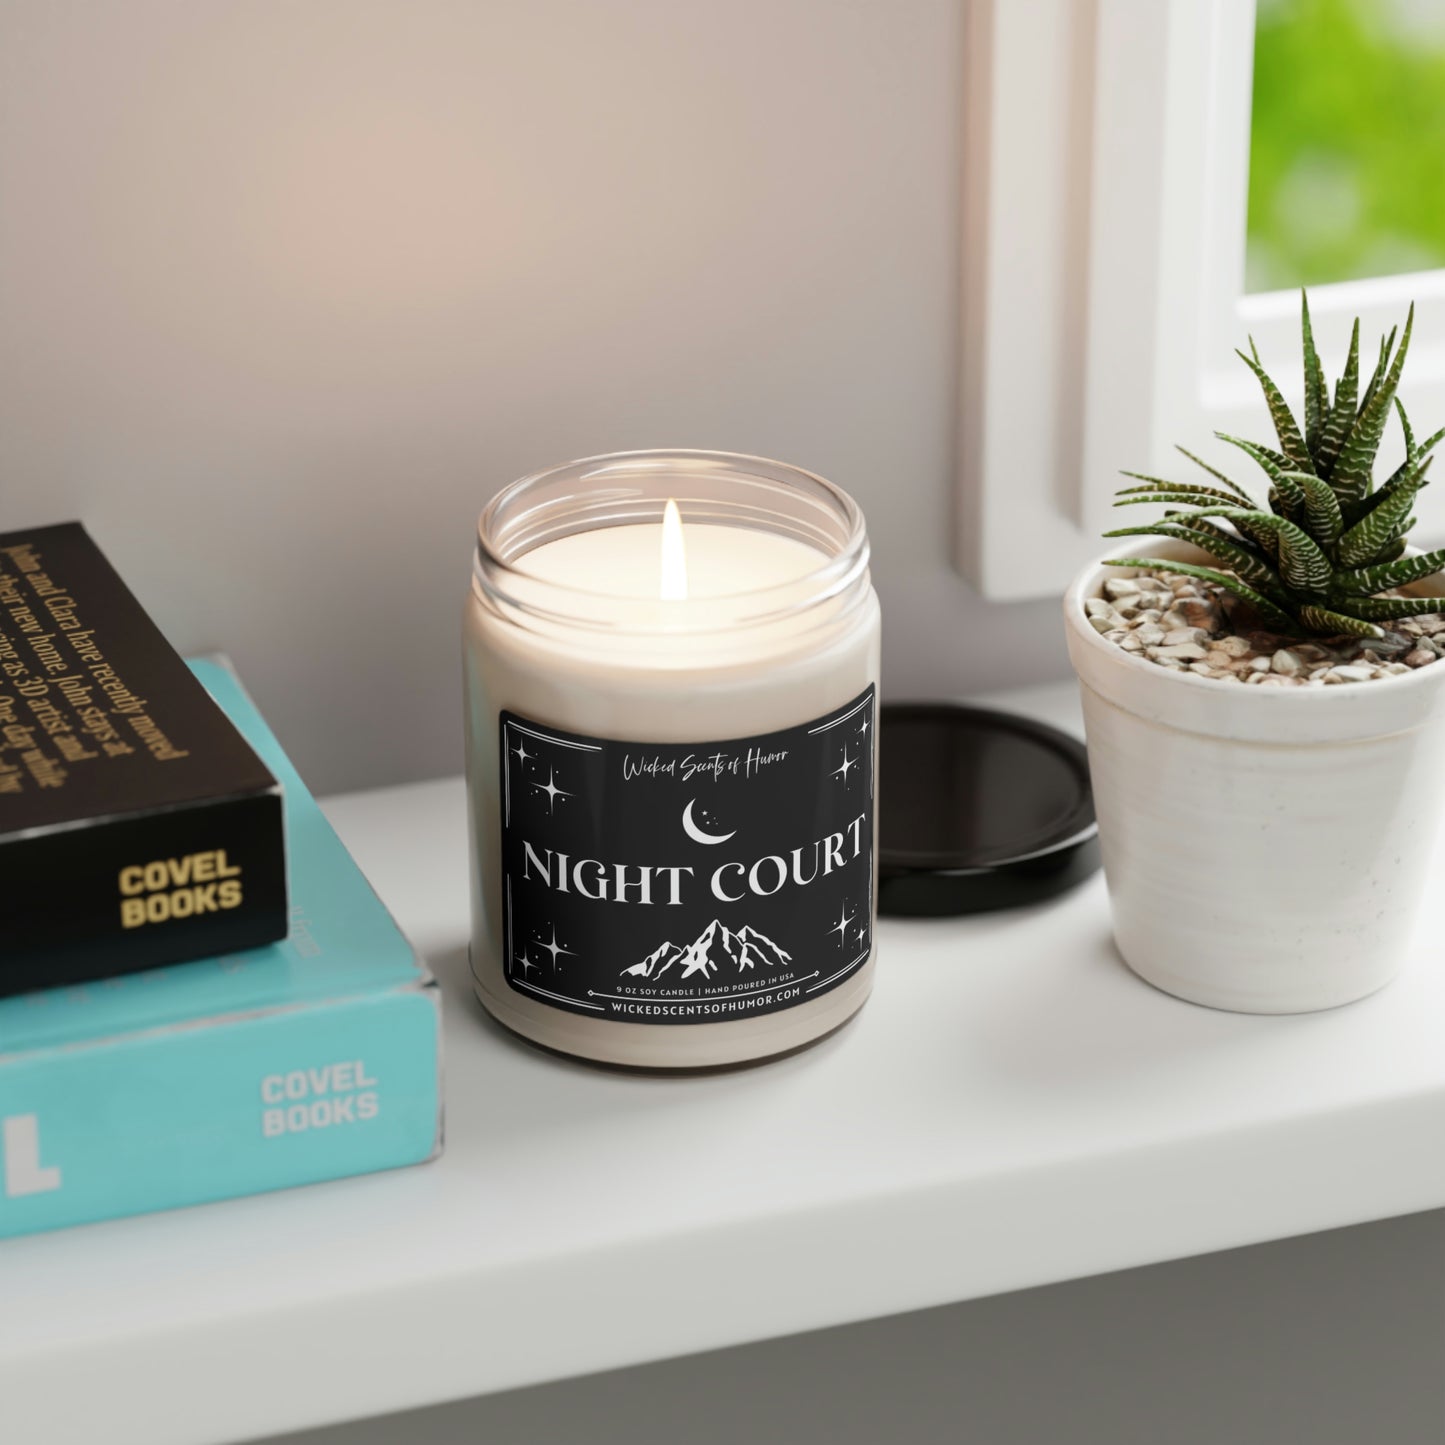 NIGHT COURT Soy Candle, acotar, acomaf, Book Lover Candle, Book Scented Candle, Literary Candle, Book Inspired Candle